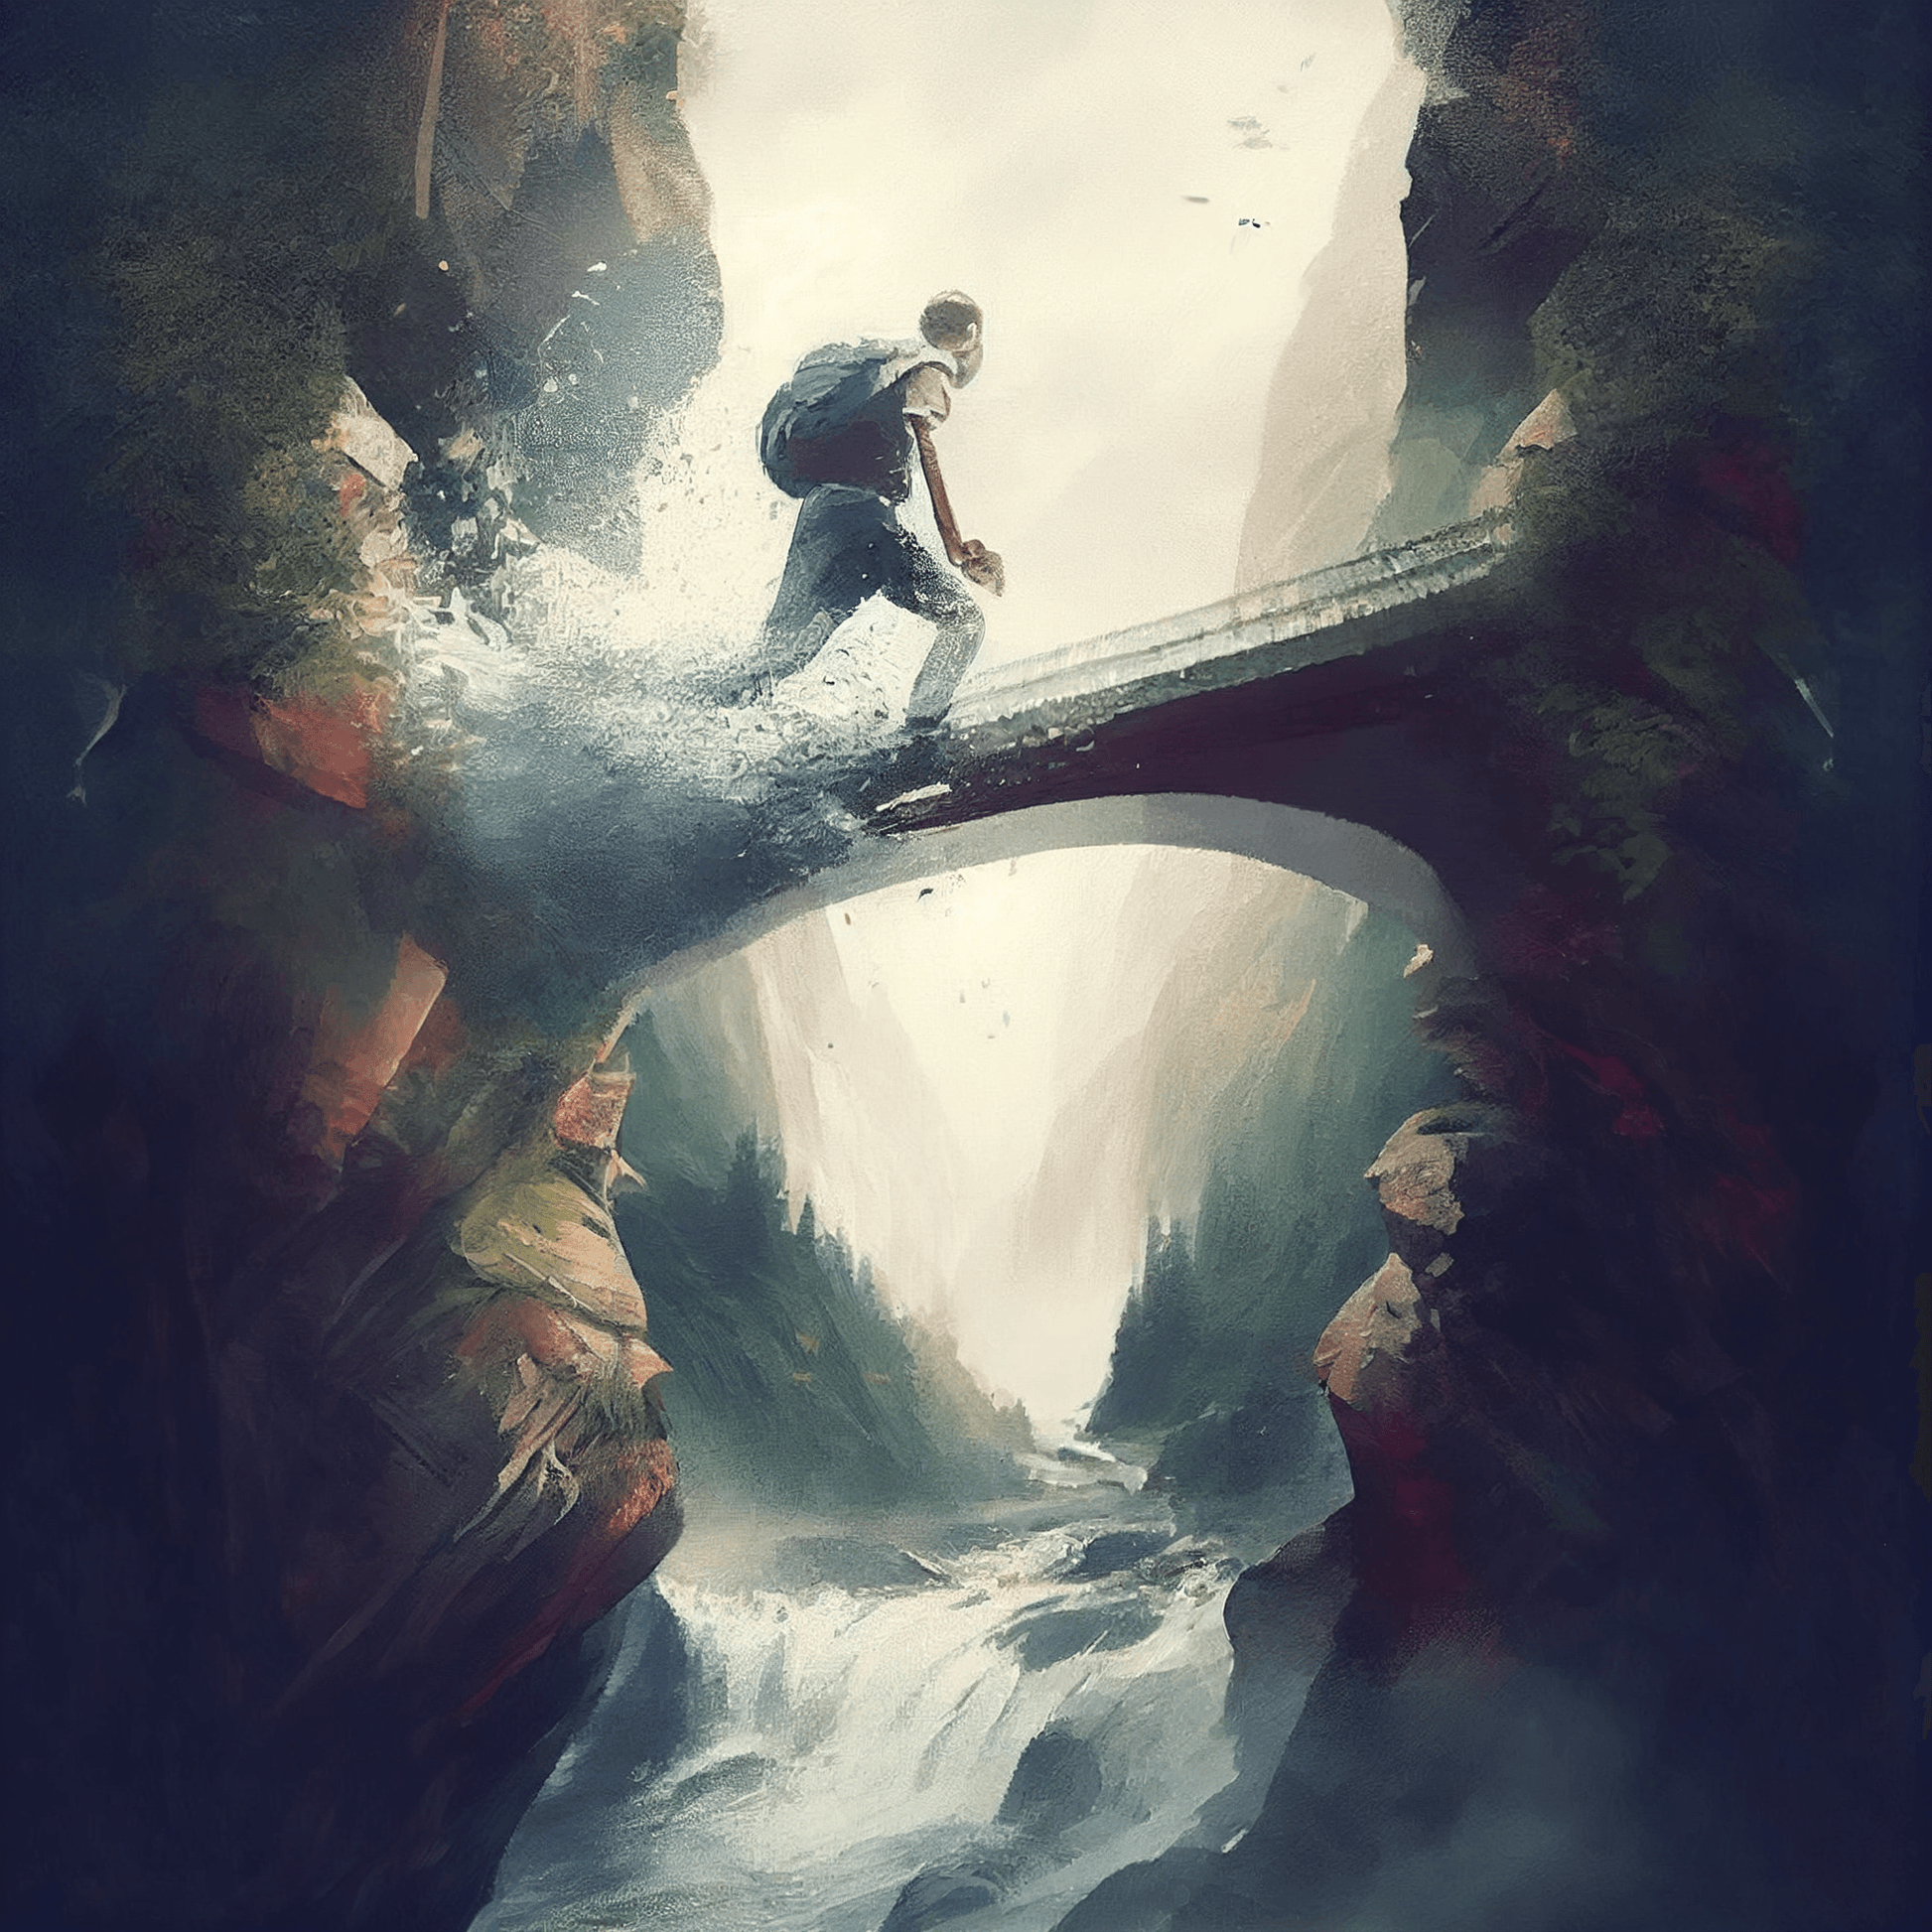 An incredible digital artwork that captures the dream of a mountain bridge surrounded by greenery and a magnificent waterfall. The feeling of flying down while suspended in the void, mixed with fear and adventure, makes this dream unforgettable. And if you're afraid of heights, don't worry, our artwork won't give you vertigo!